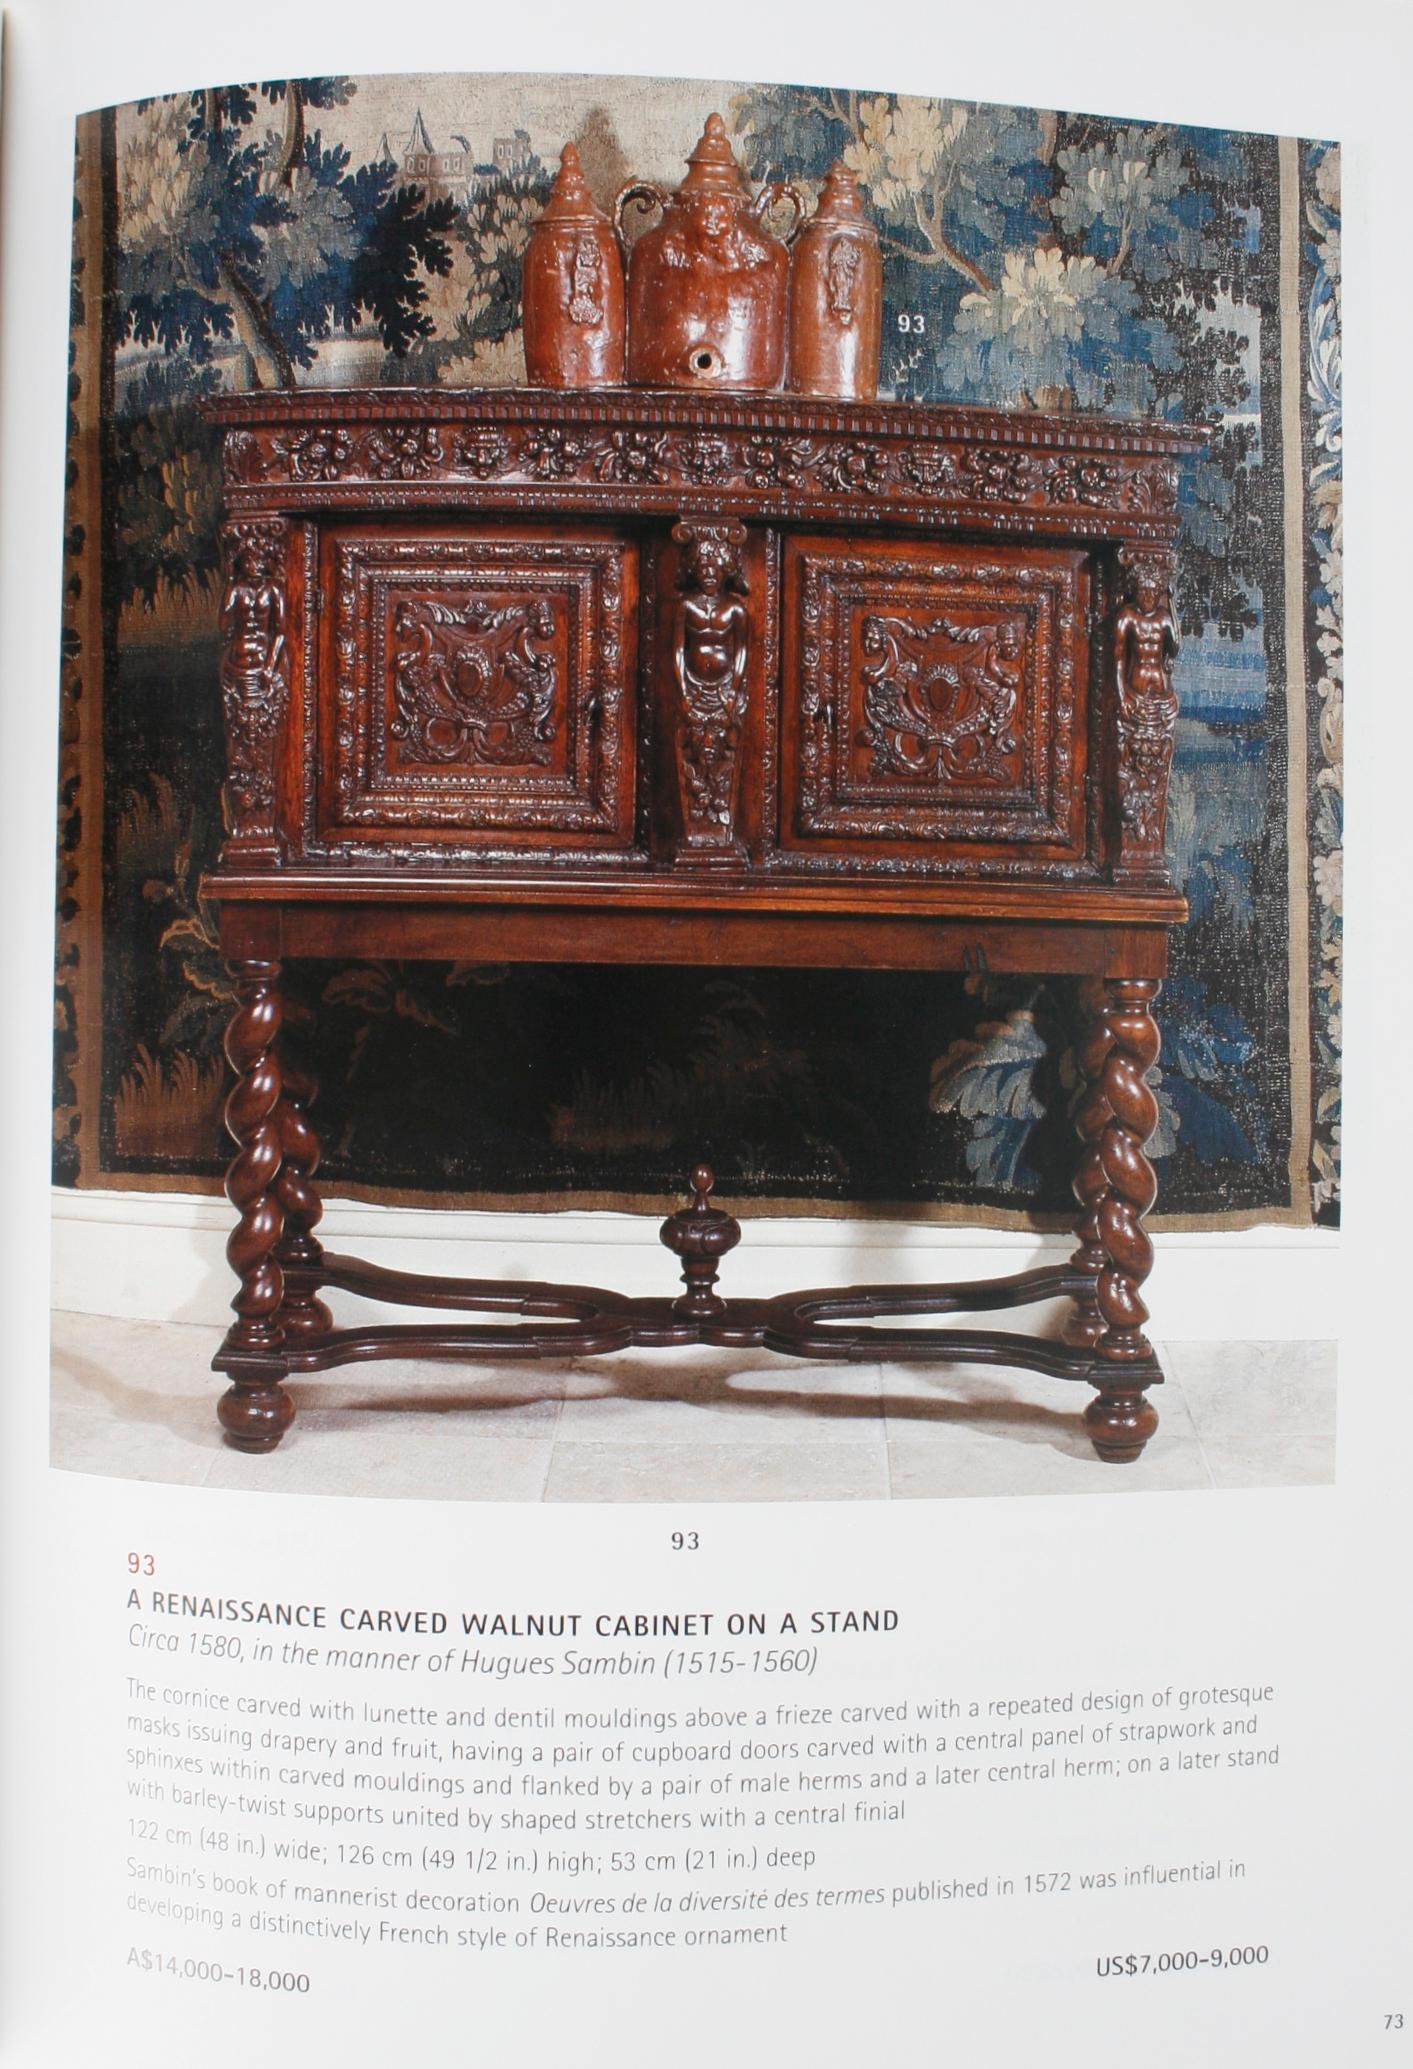 Christies avril 2002 French Furniture & Decorative Arts, a & C Fink Collections en vente 5